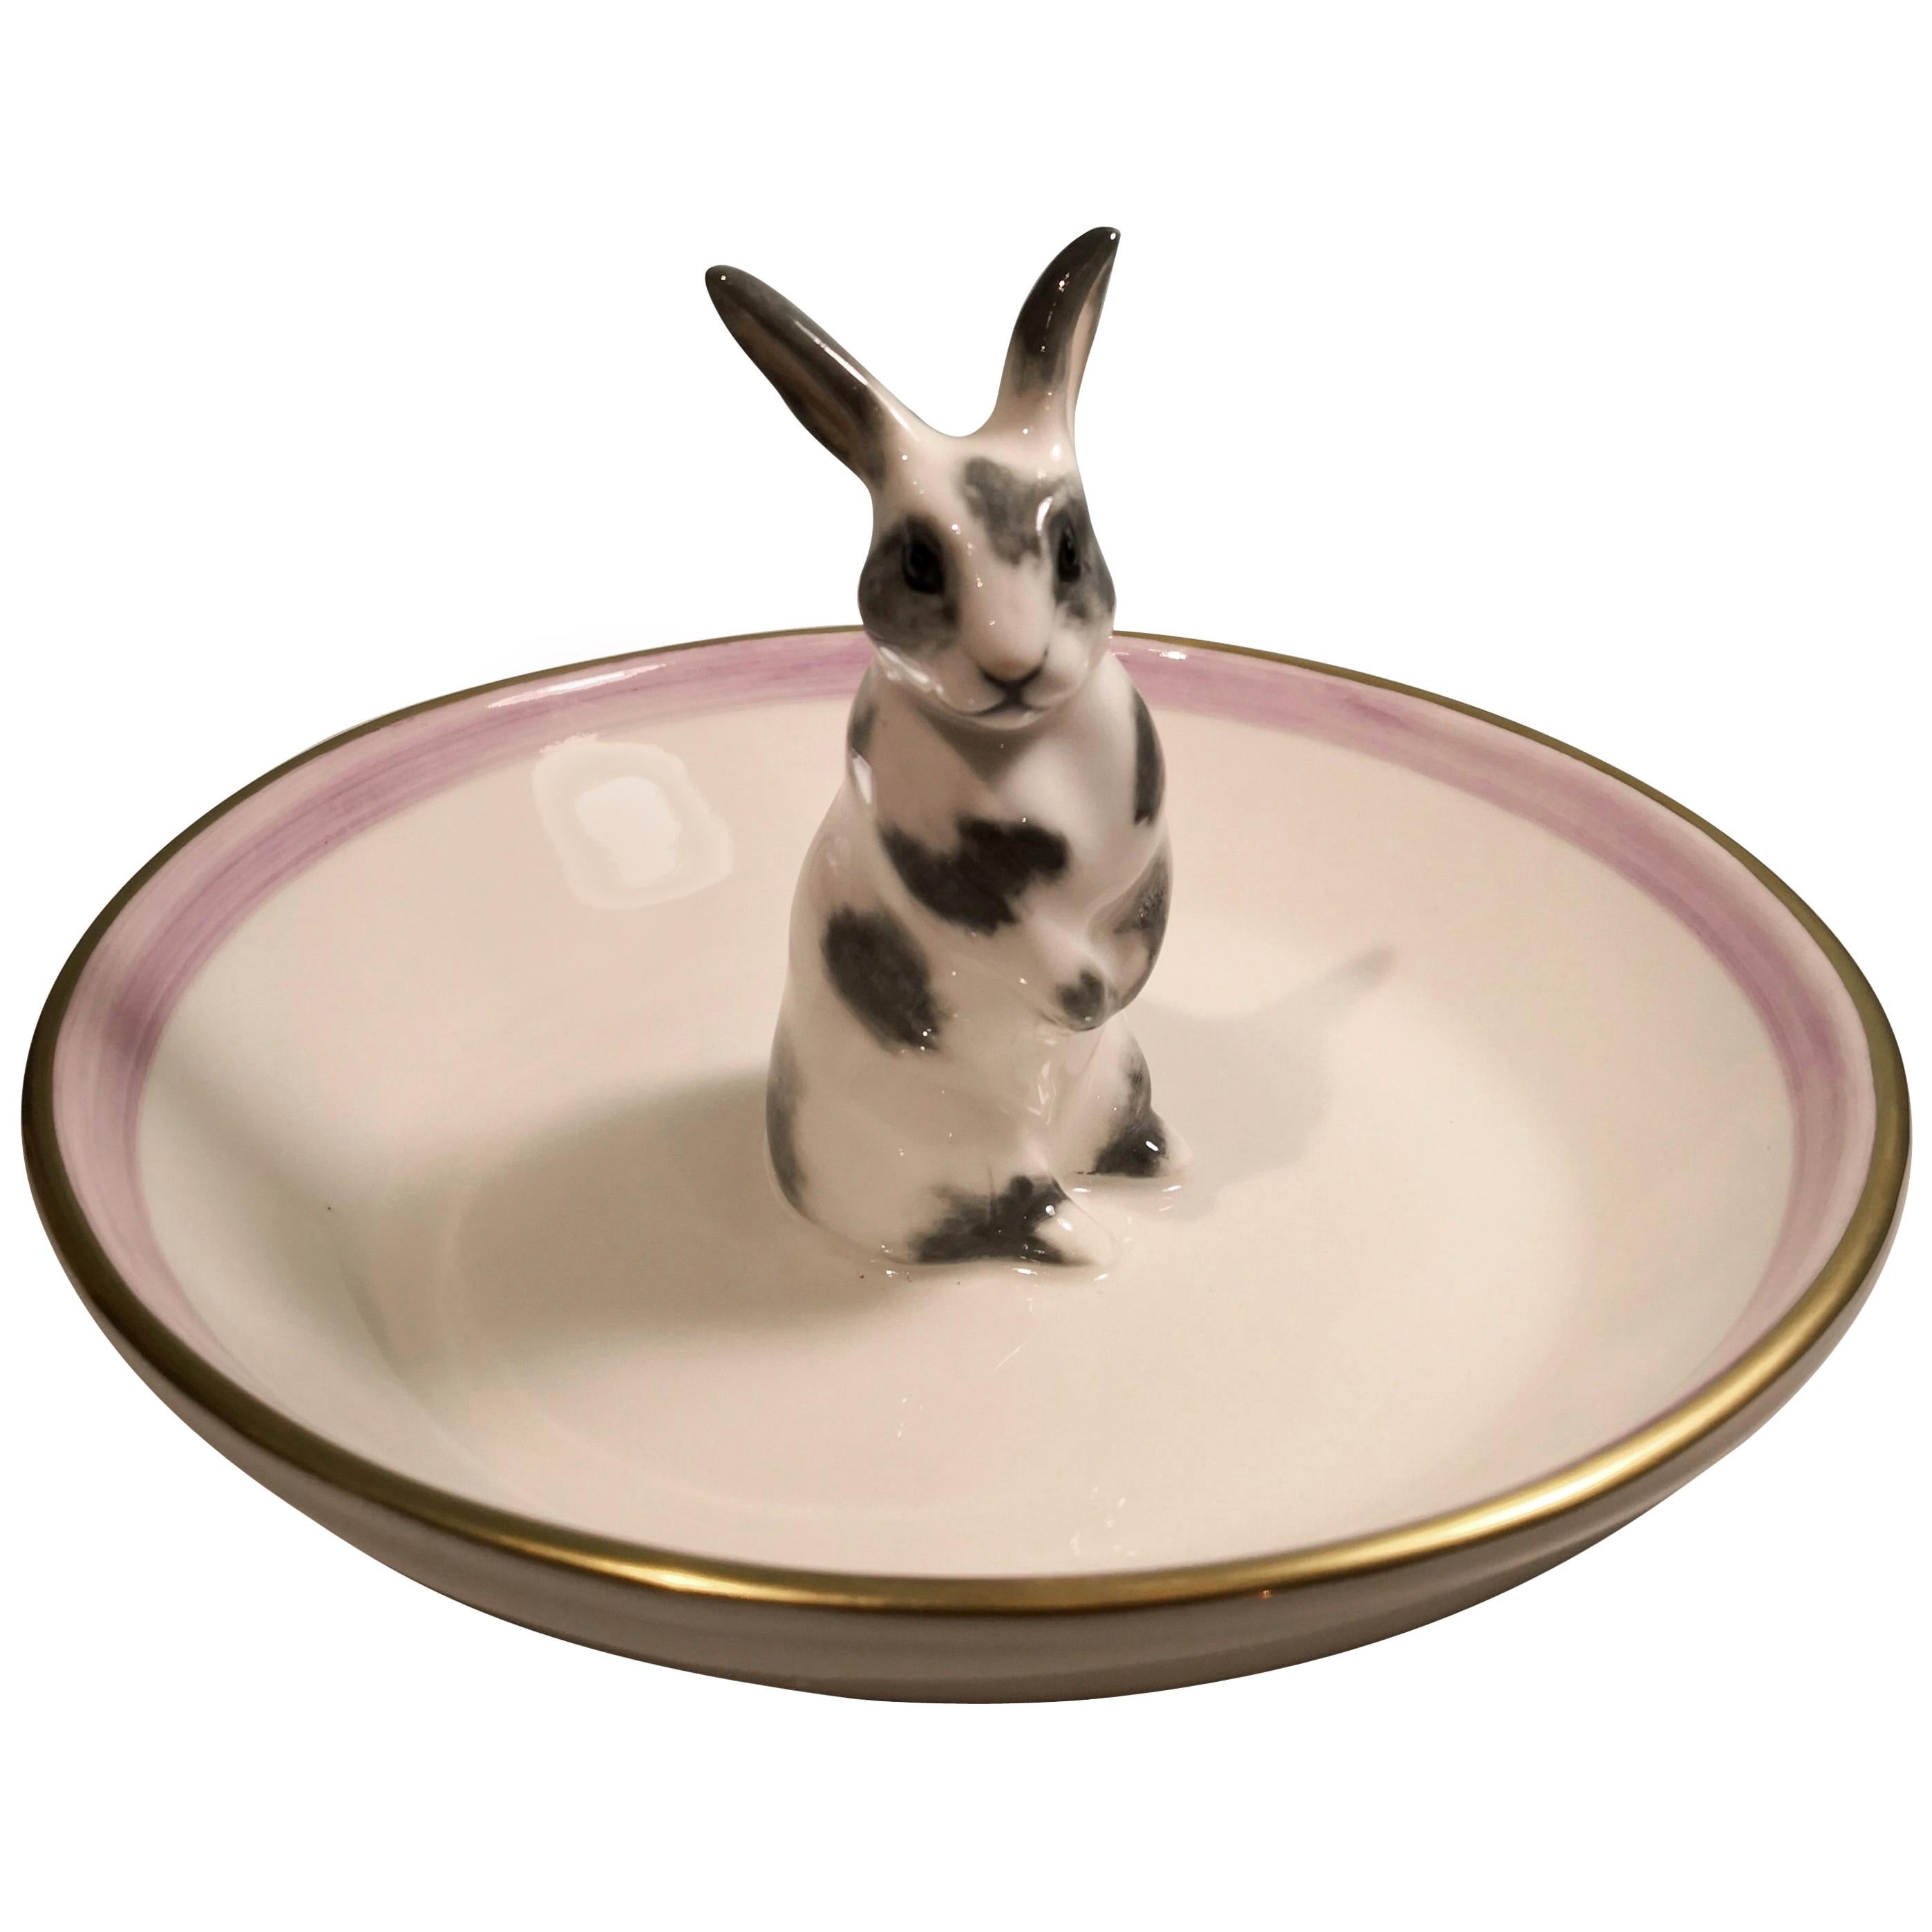 Country Style Porcelain Bowl with Bunny Figure Sofina Boutique Kitzbuehel